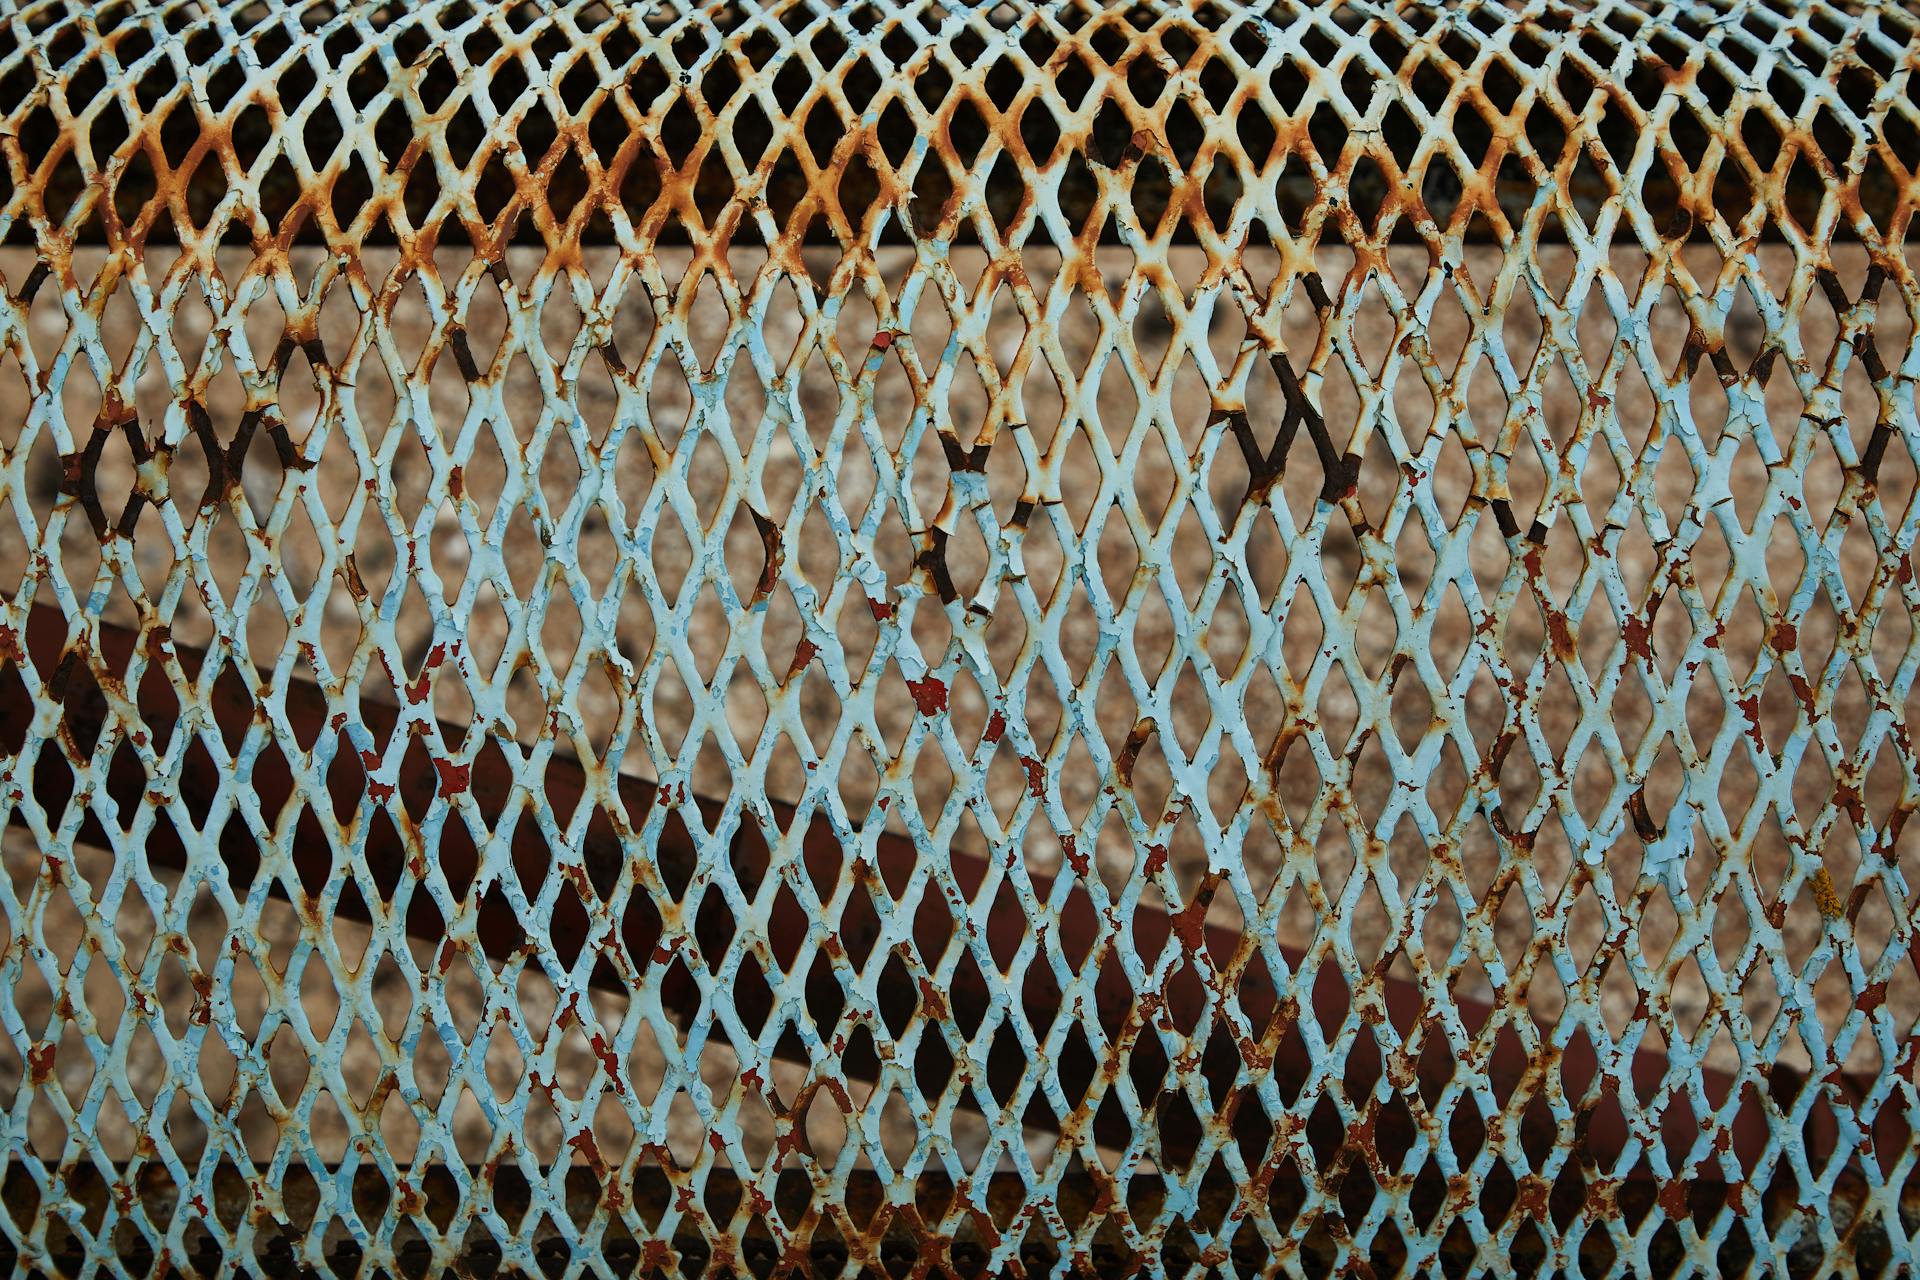 Full frame of weathered blue metal lattice with rusty parts and spots placed on fence in daytime